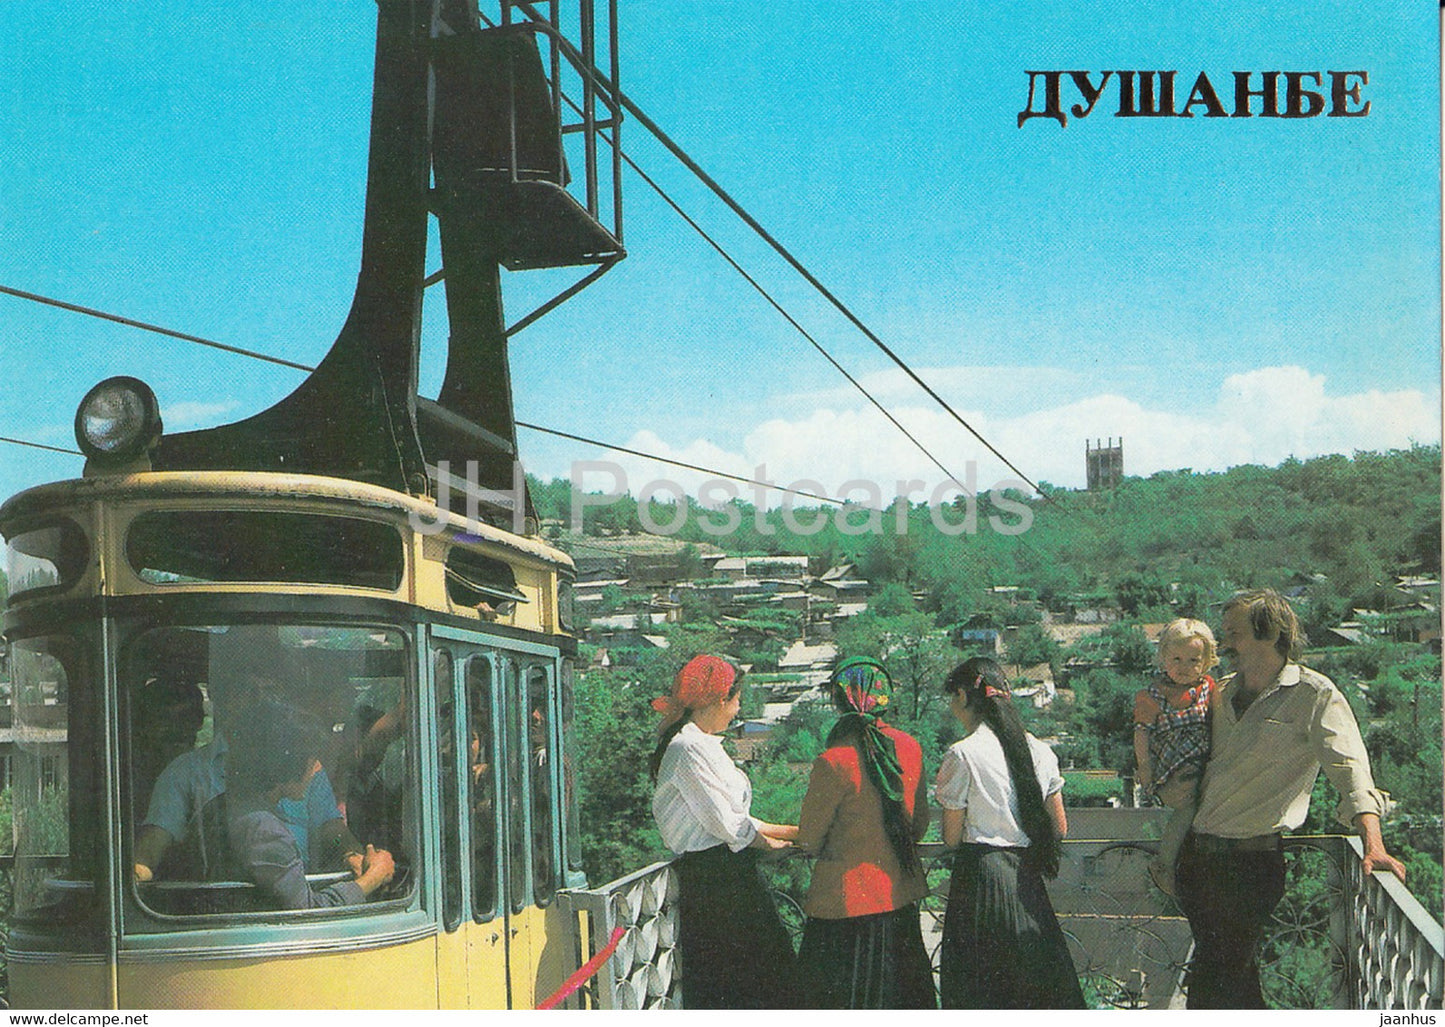 Dushanbe - Funicular in Victory park - 1985 - Tajikistan USSR - unused - JH Postcards